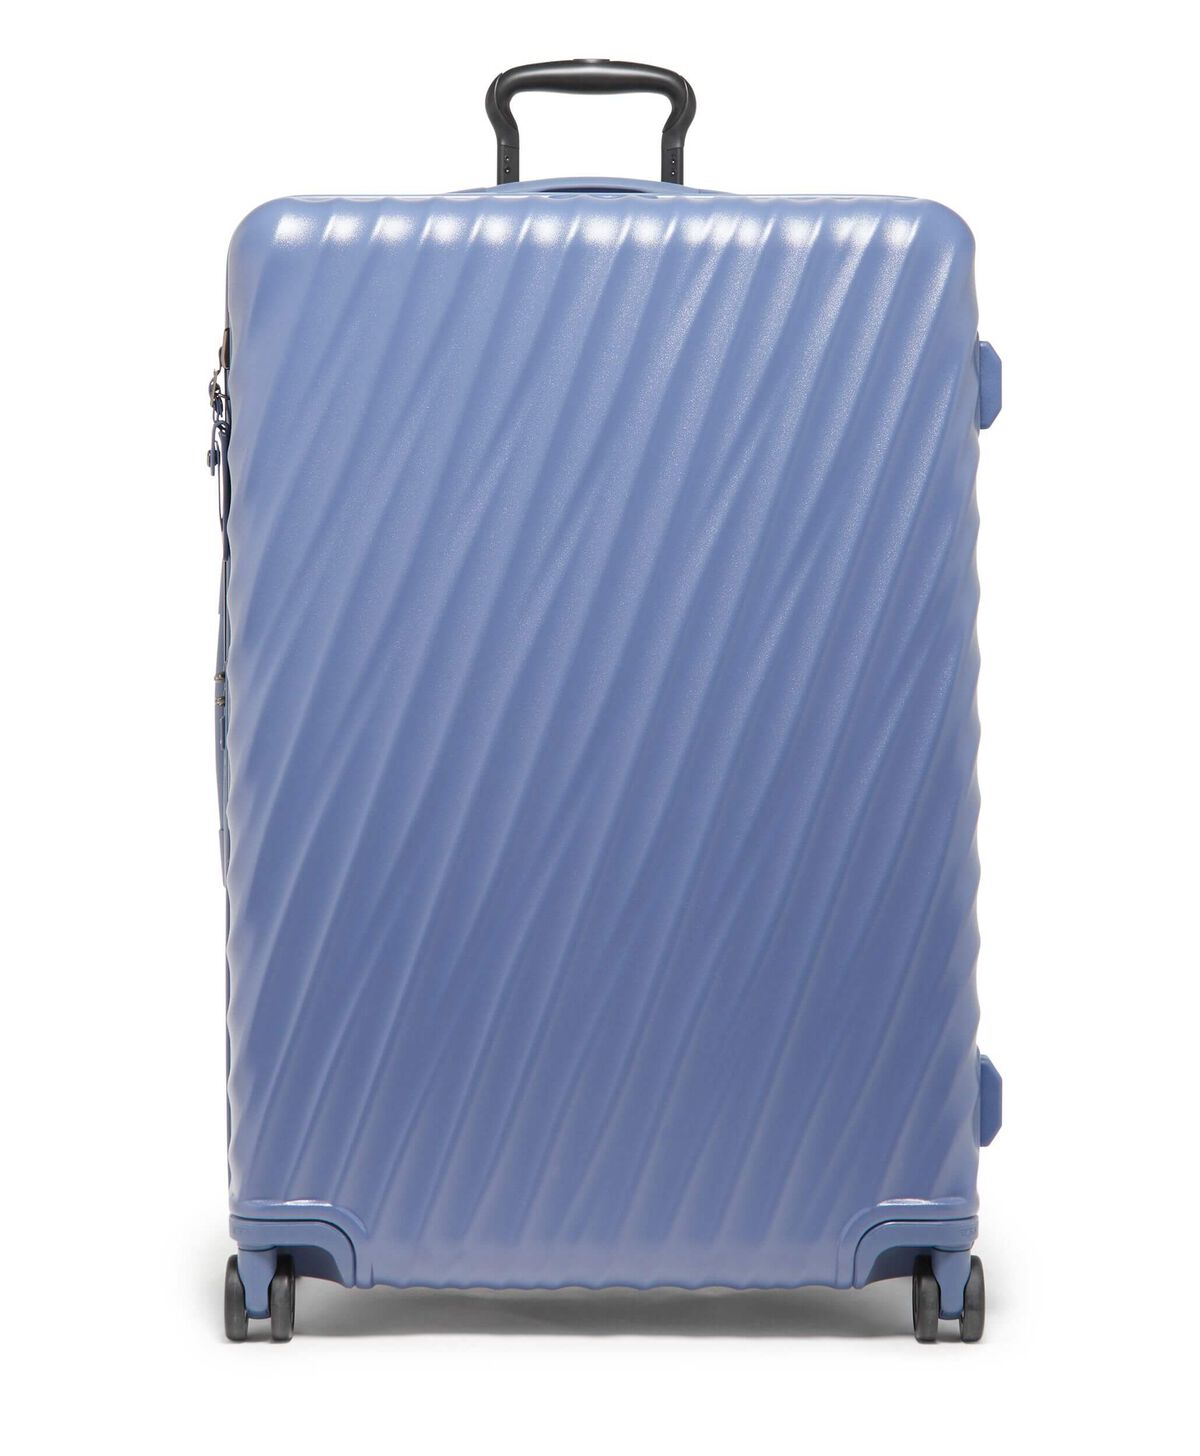 19 Degree Extended Trip Expandable Checked Luggage 77,5 cm | TUMI Spain